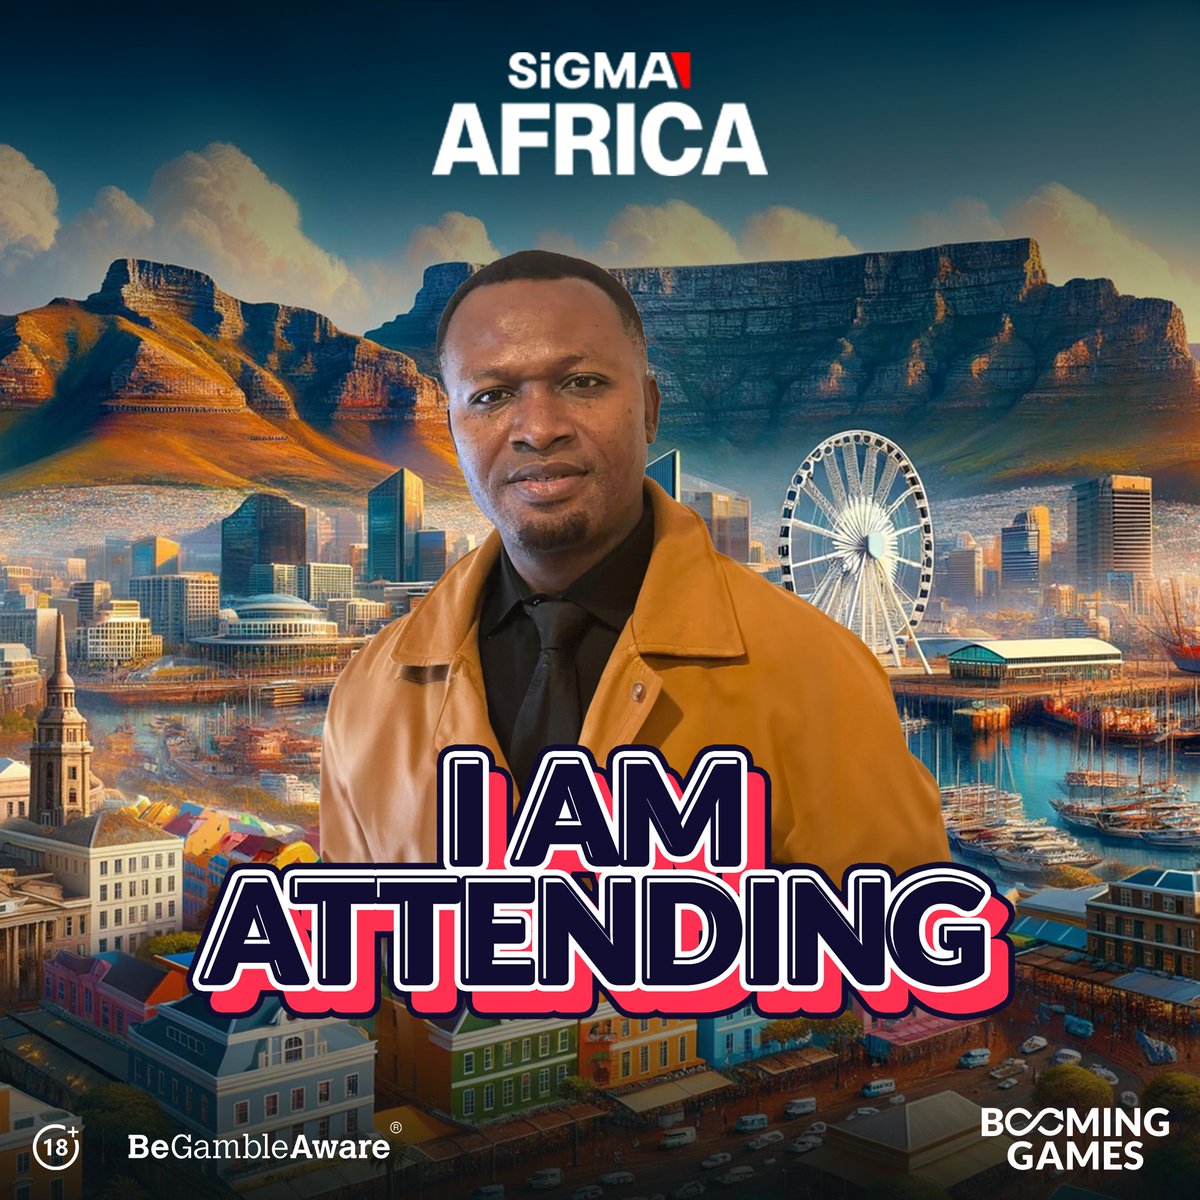 Our fantastic Head of Africa, Solomon Godwin, will attend SiGMA Africa in beautiful Cape Town! Reach out to him to schedule a meeting and chat about our offer! #igaming #slots #slotonline #games #slotgame #videoslot #casino #games #casinogames #SiGMA #CapeTown